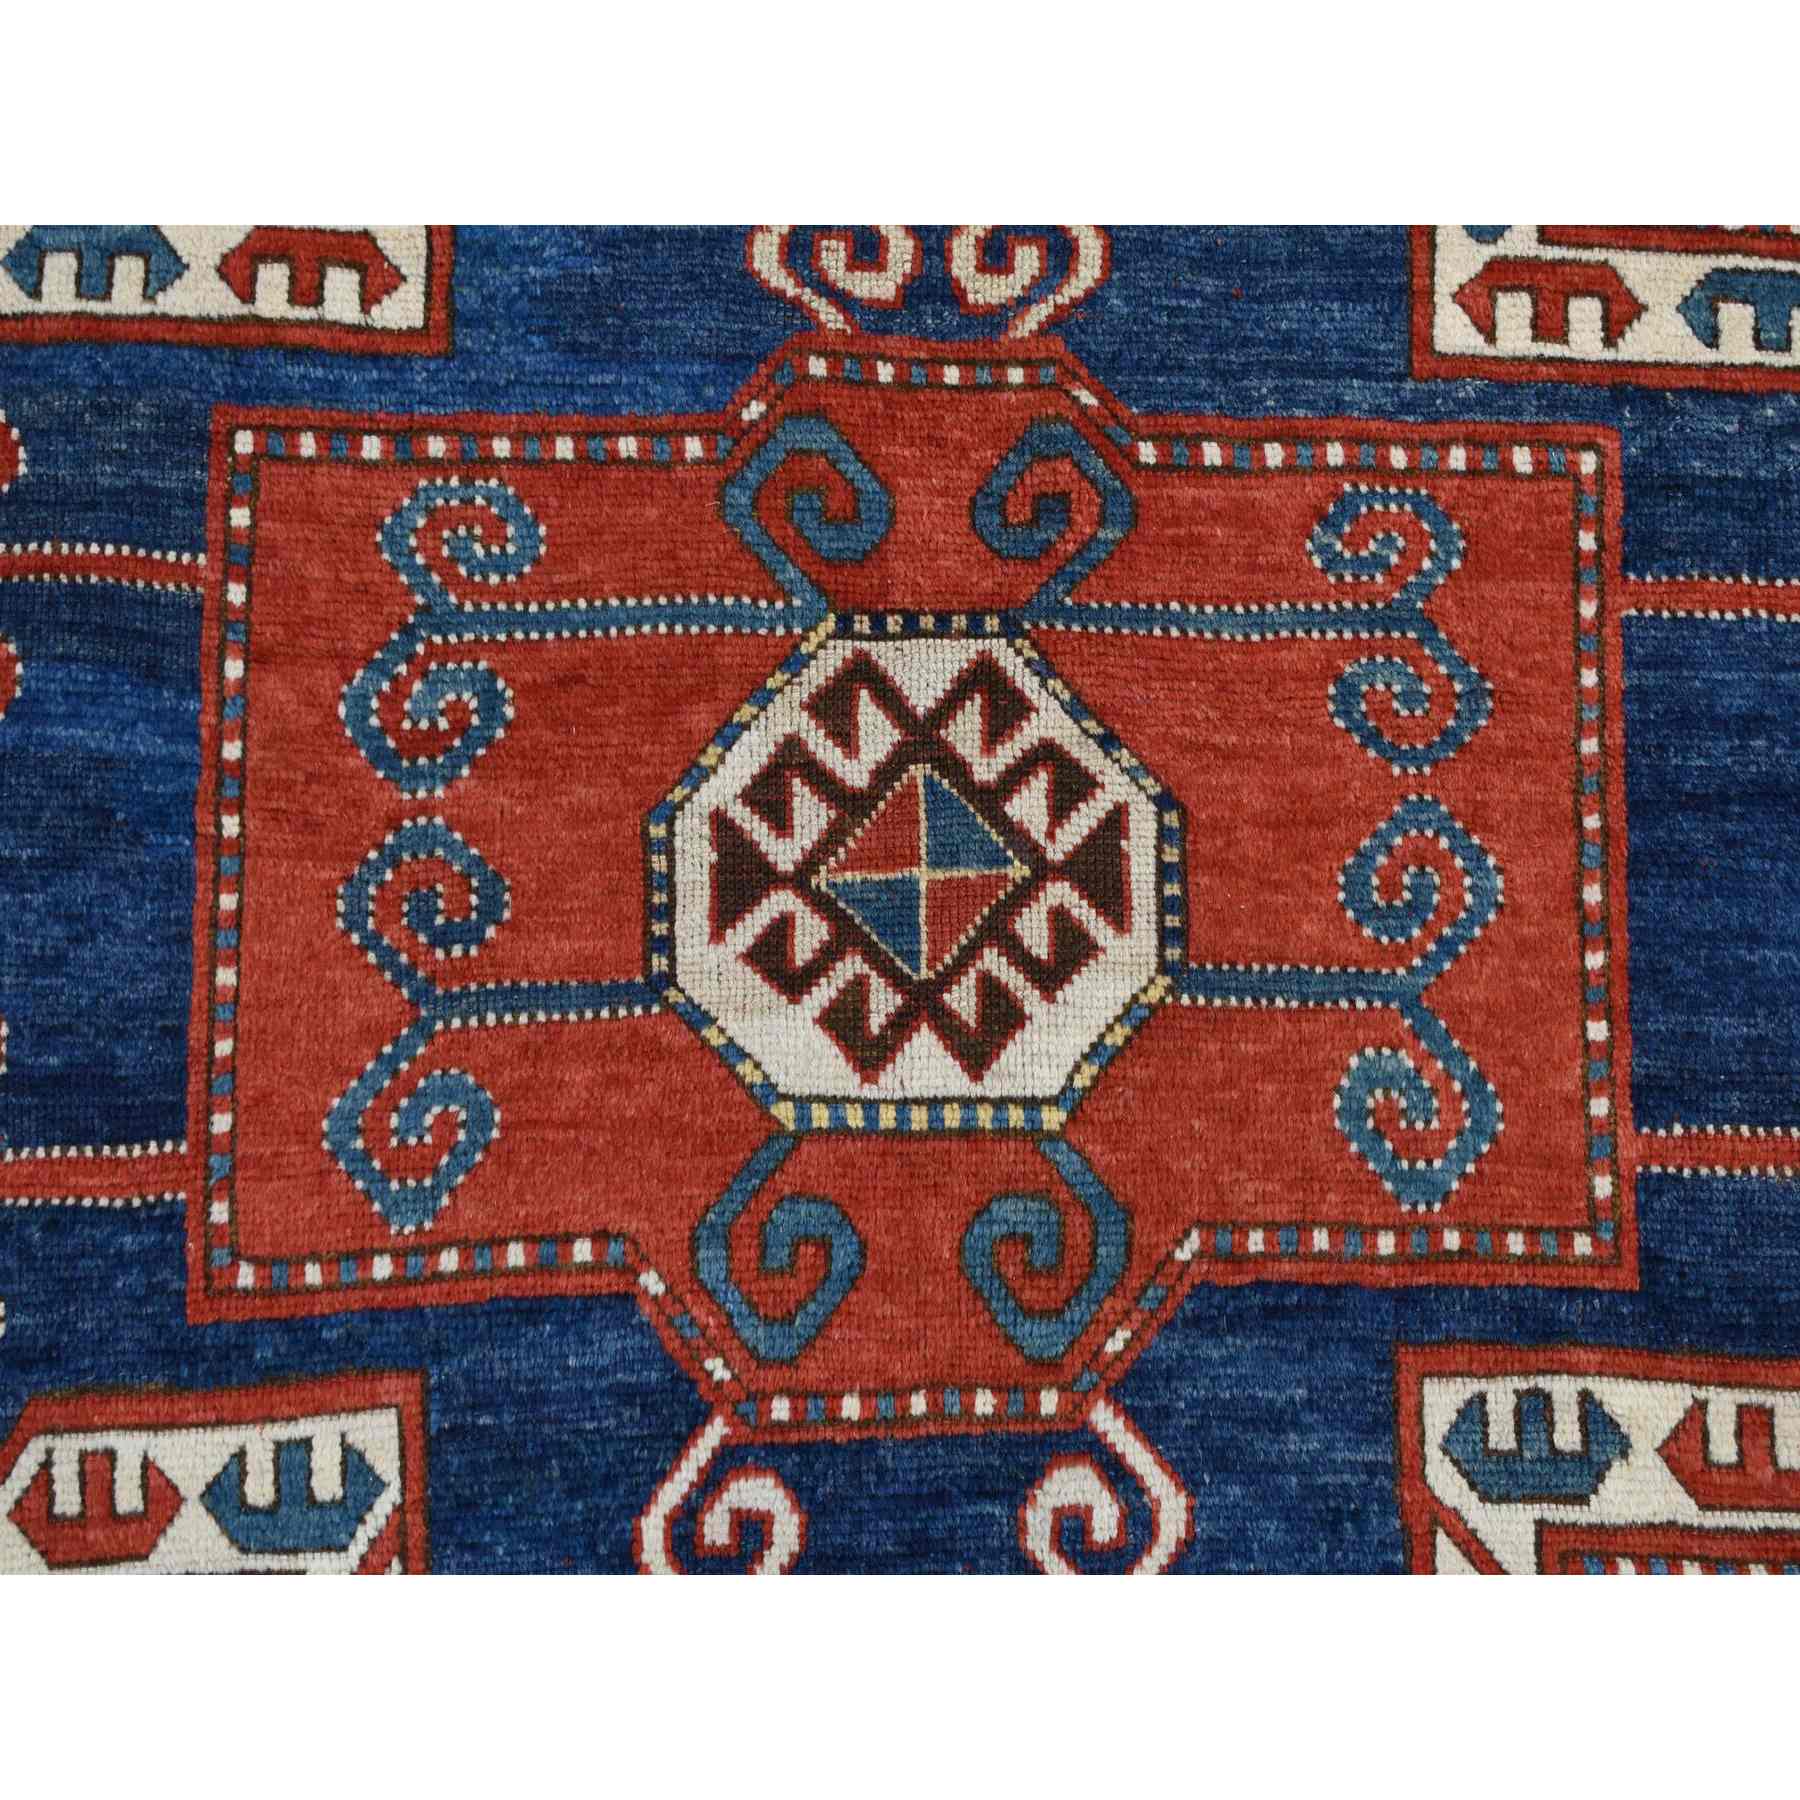 Antique-Hand-Knotted-Rug-390280